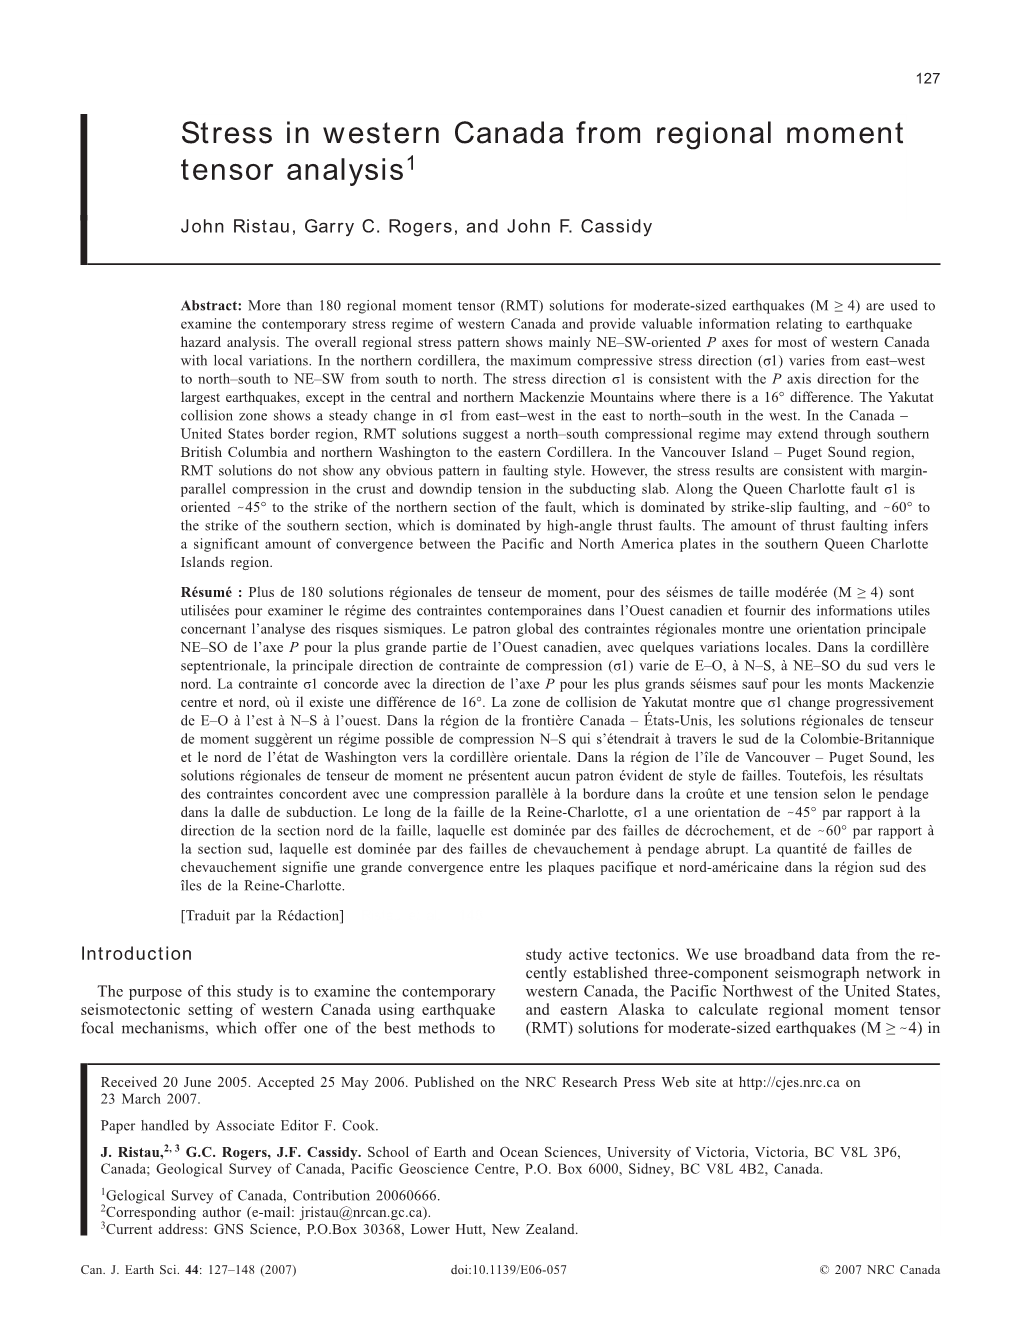 Stress in Western Canada from Regional Moment Tensor Analysis1